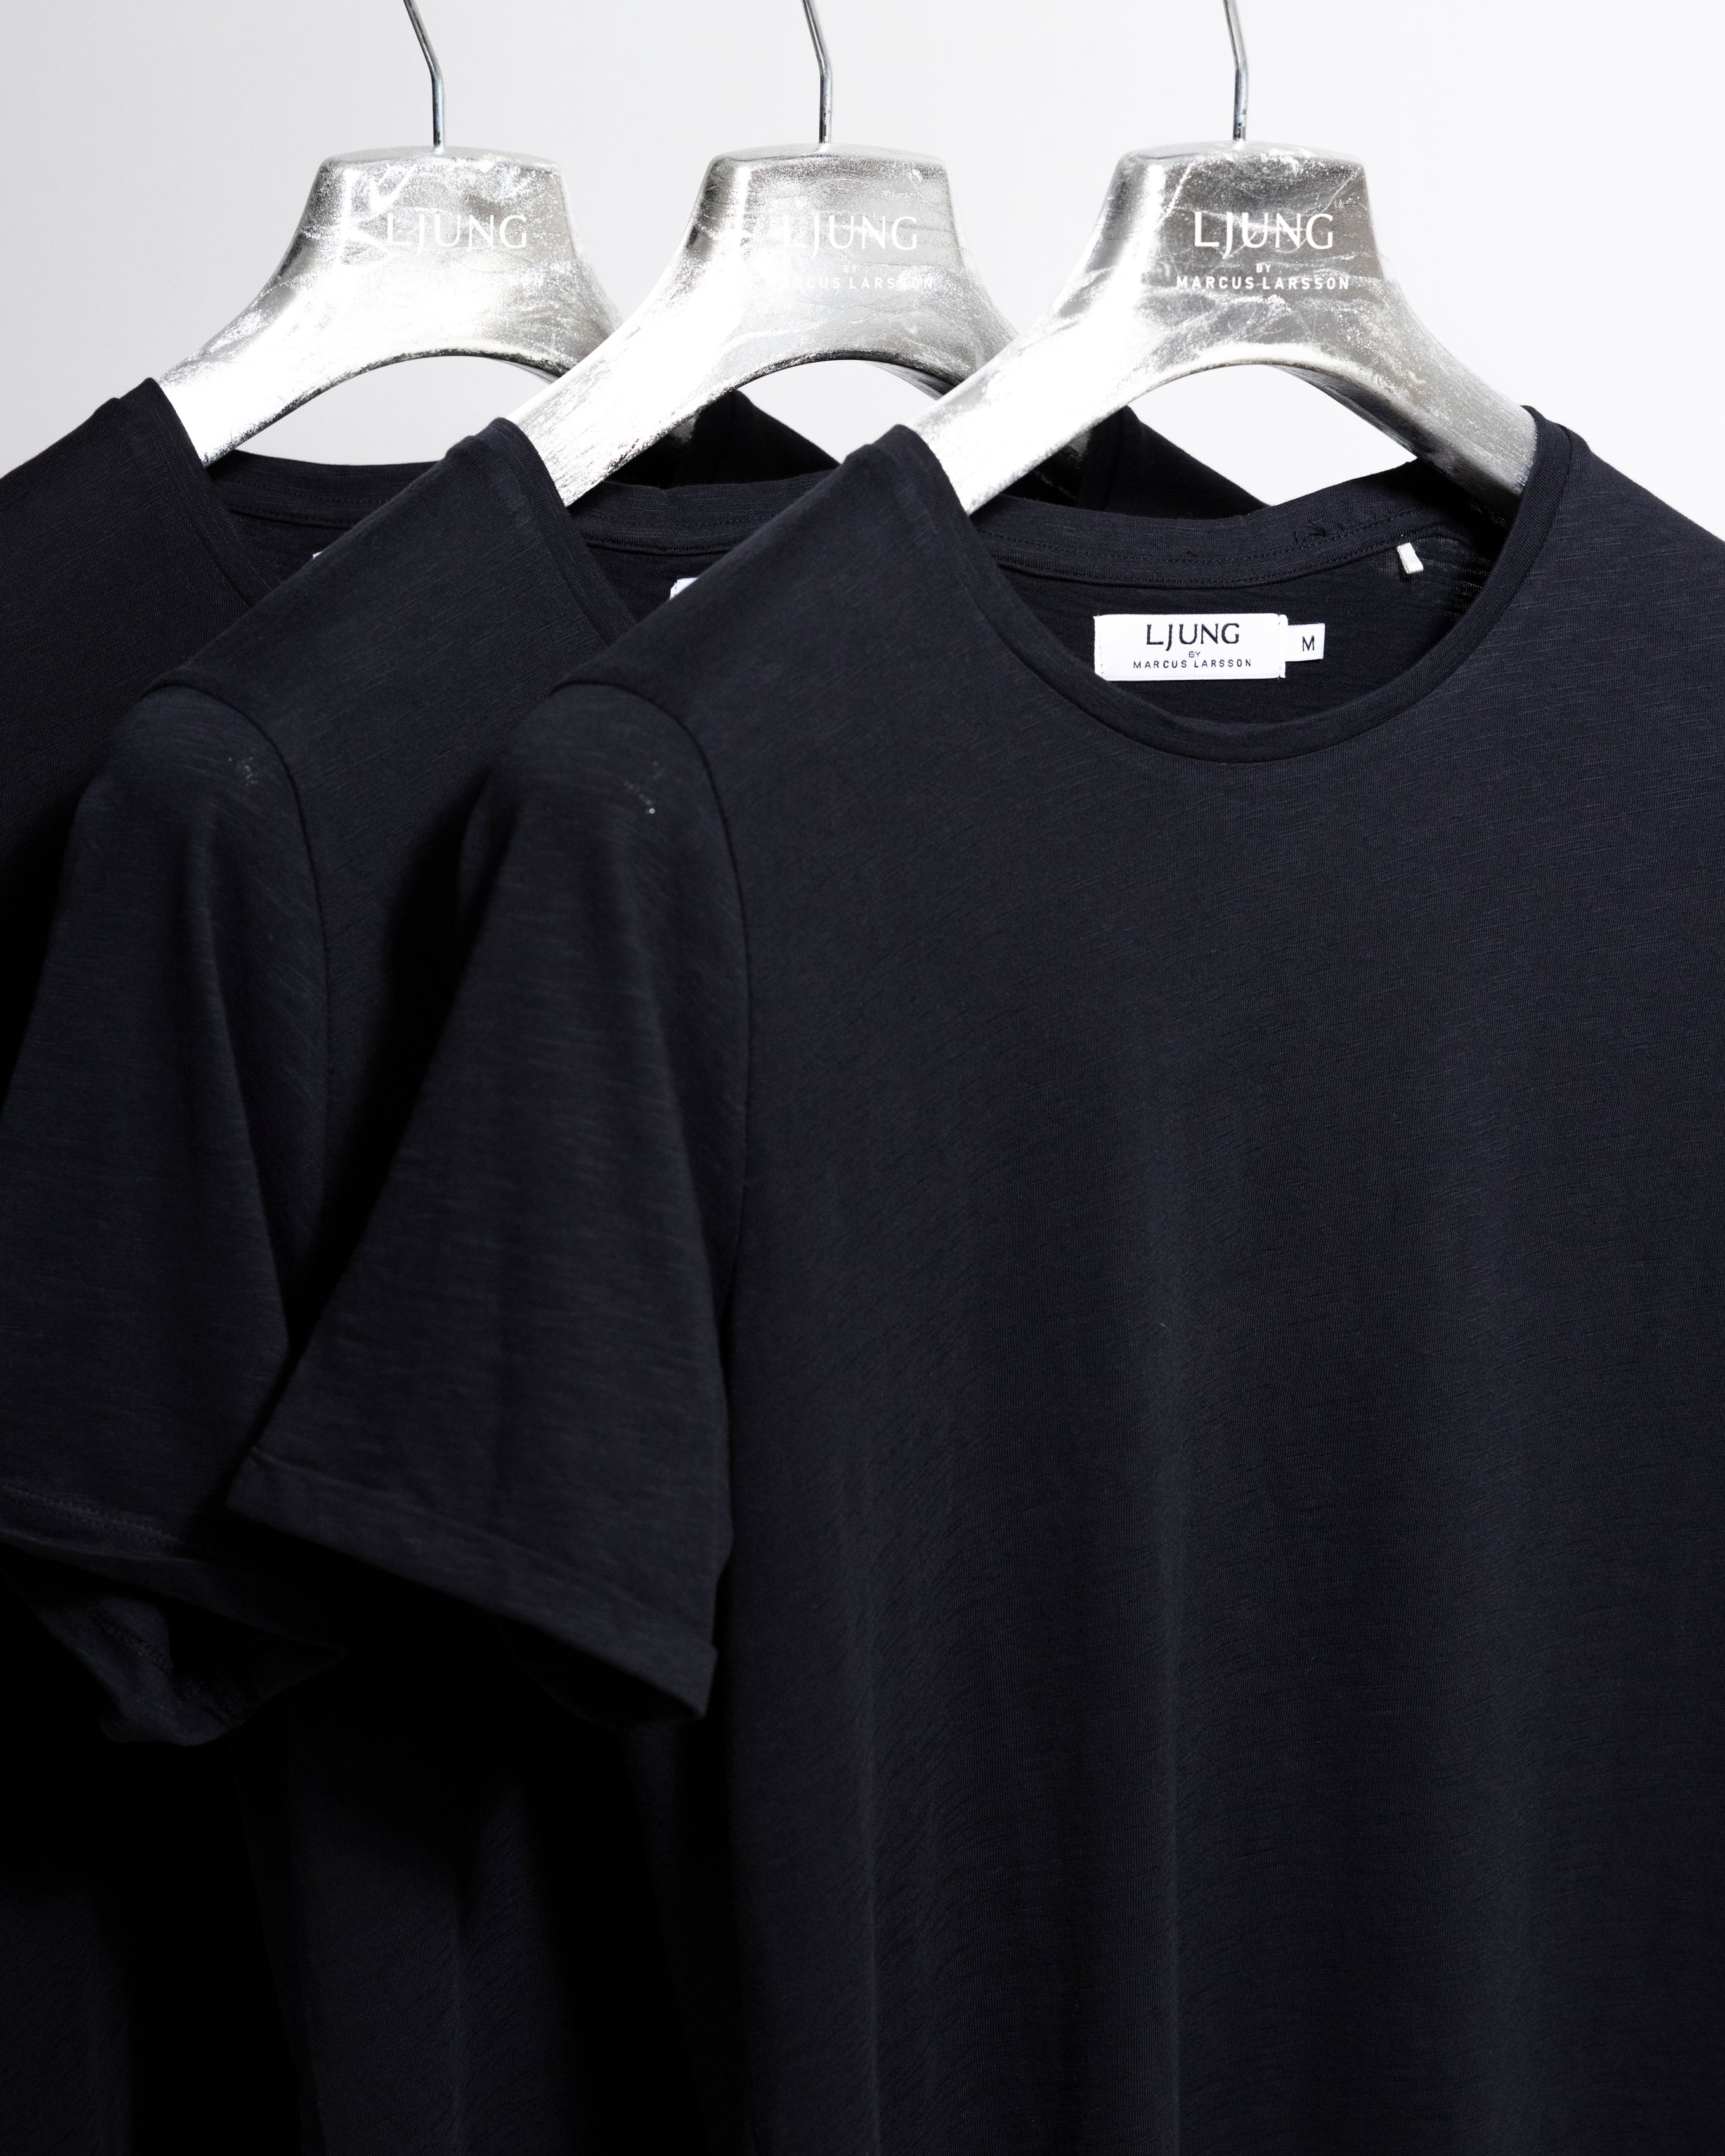 Core Tee 3 Pack - Black-Ljung by Marcus Larsson